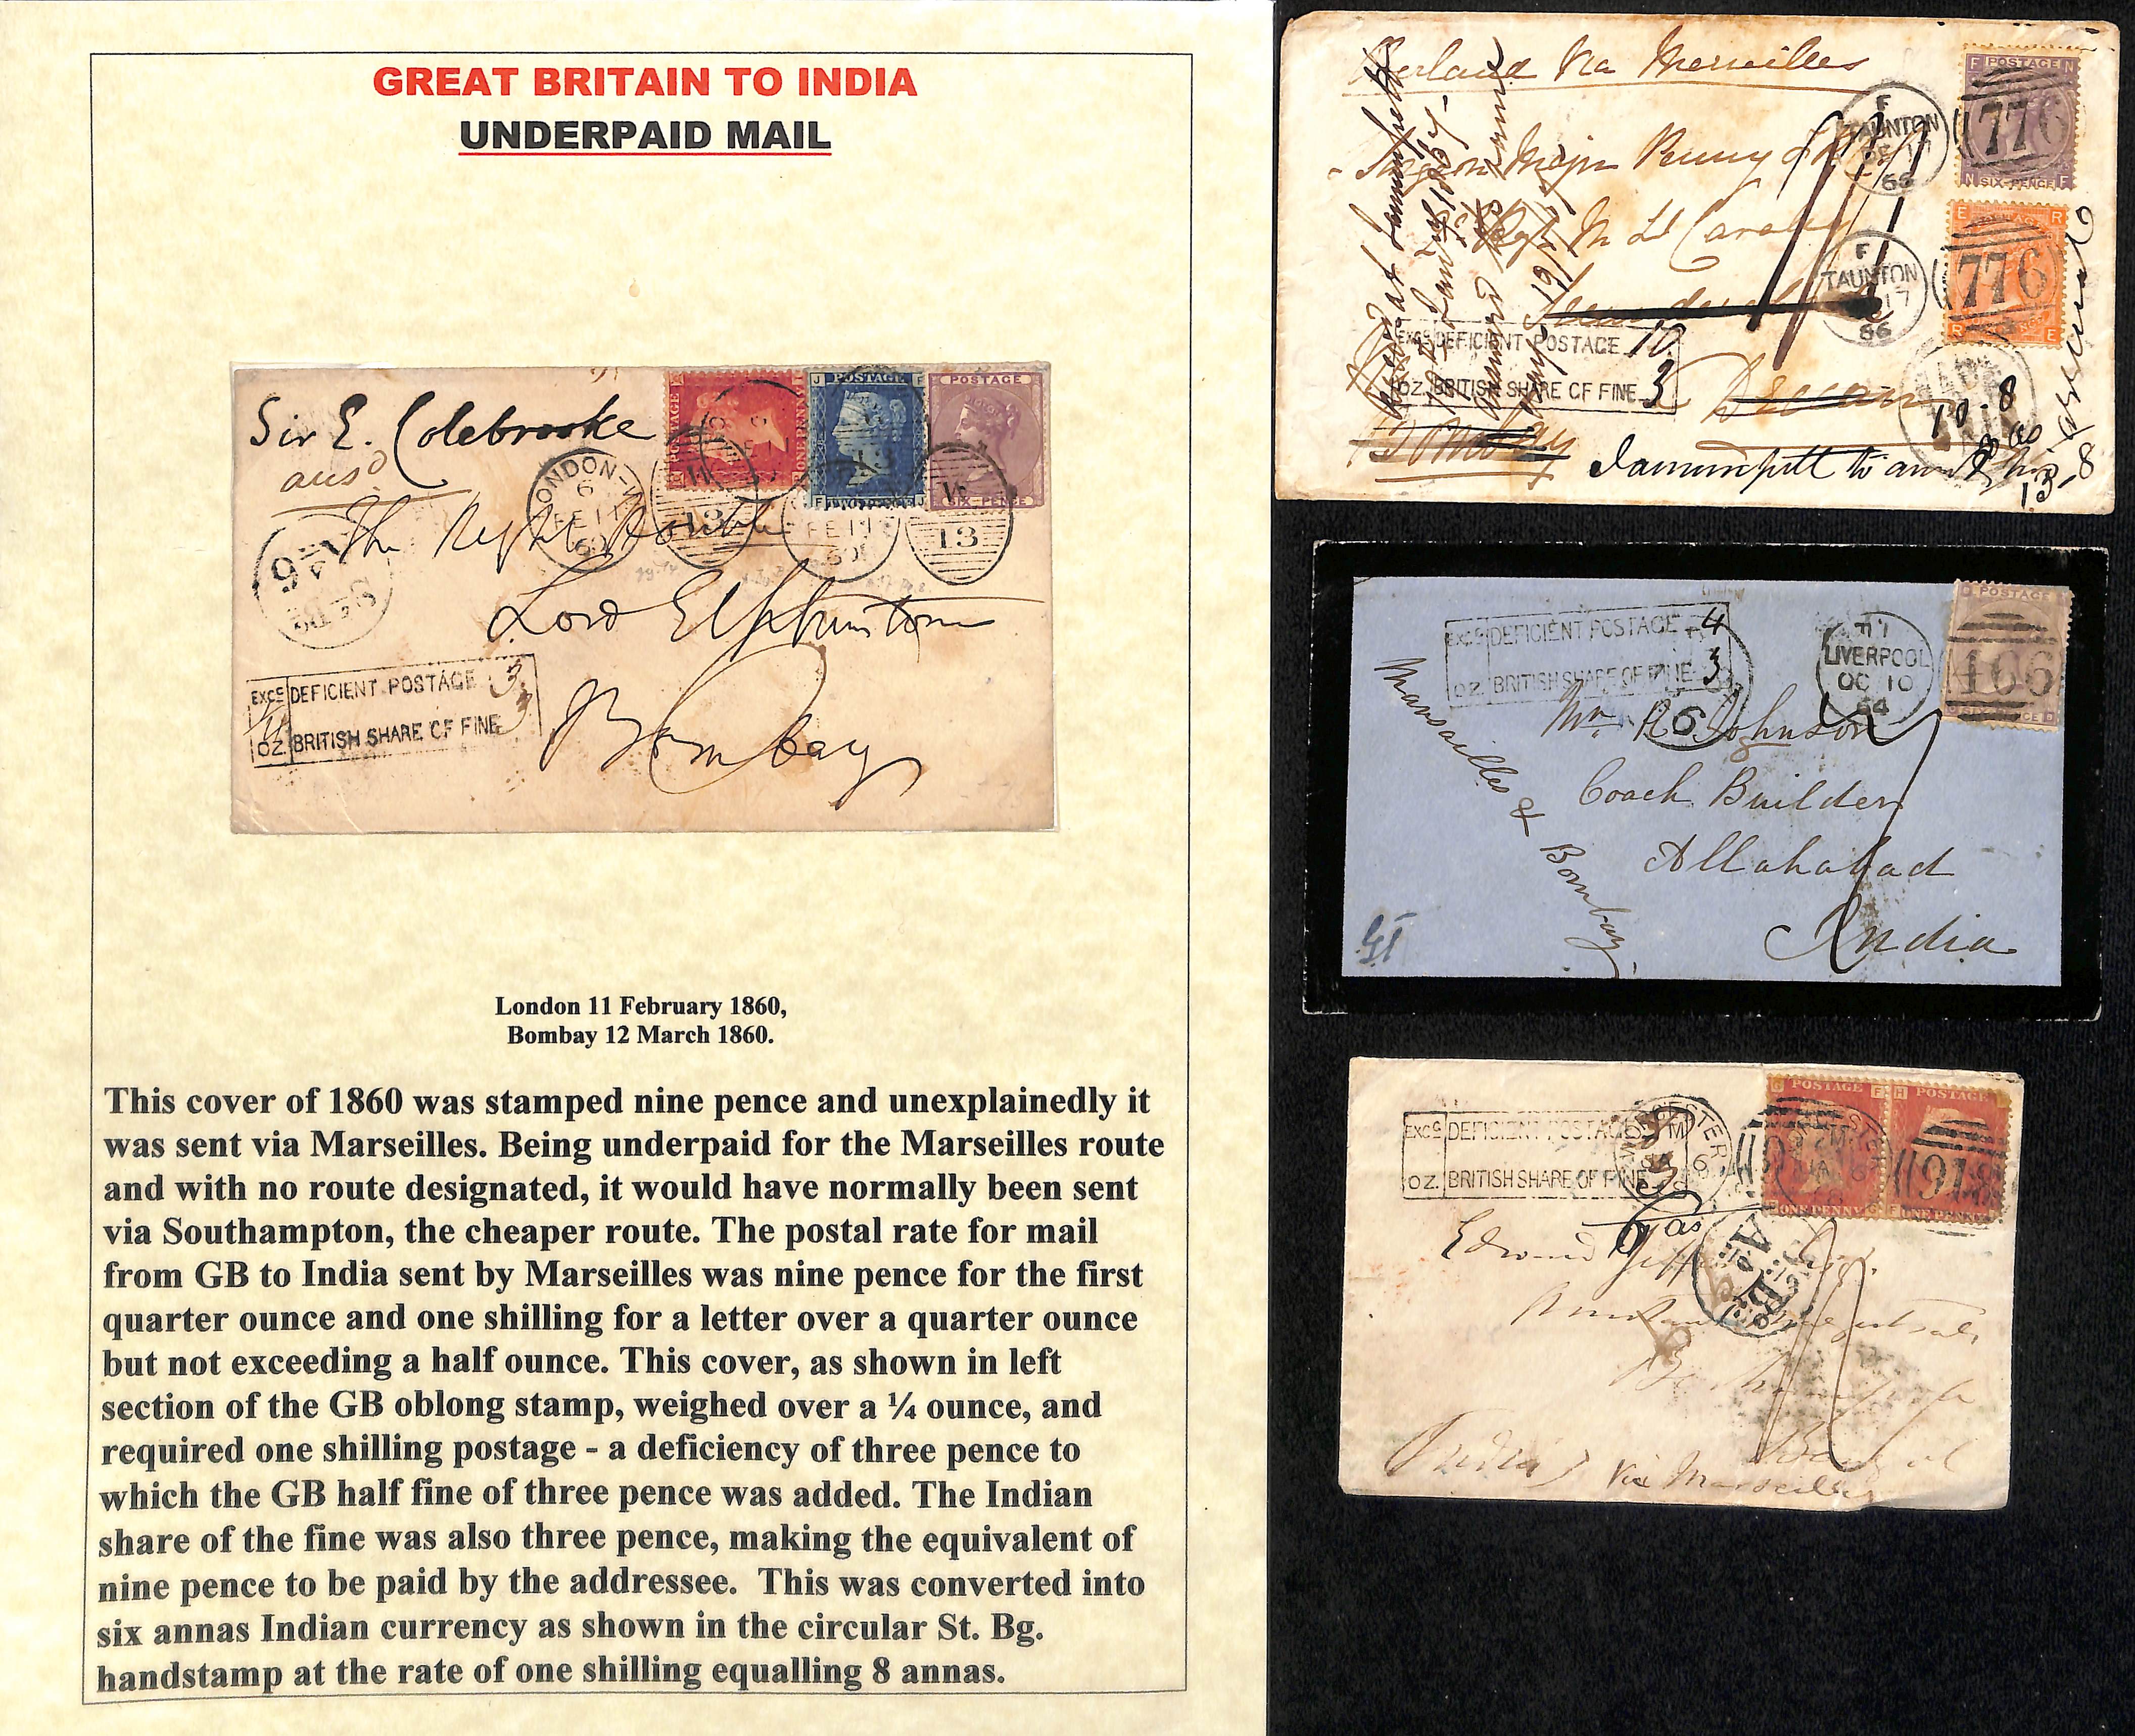 1860-68 Covers via Marseille charged the deficiency + 6d, with boxed "EXCG OZ / DEFICIENT